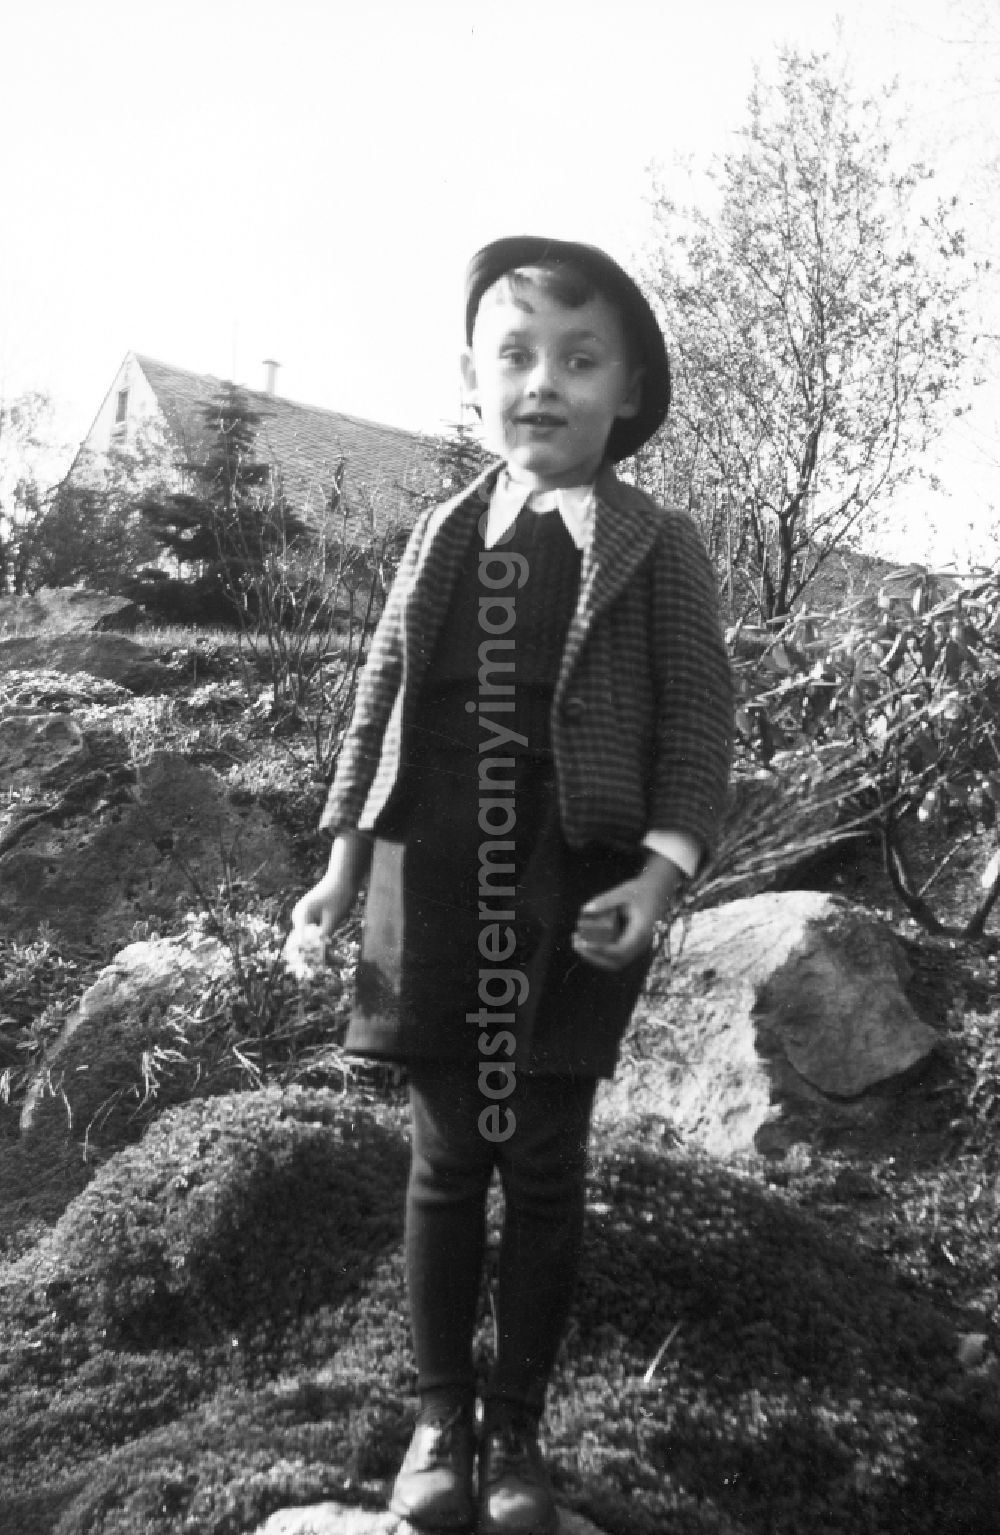 GDR picture archive: Arnstadt - Small boy with care in Arnstadt in Thuringia in the area of the German empire, Germany